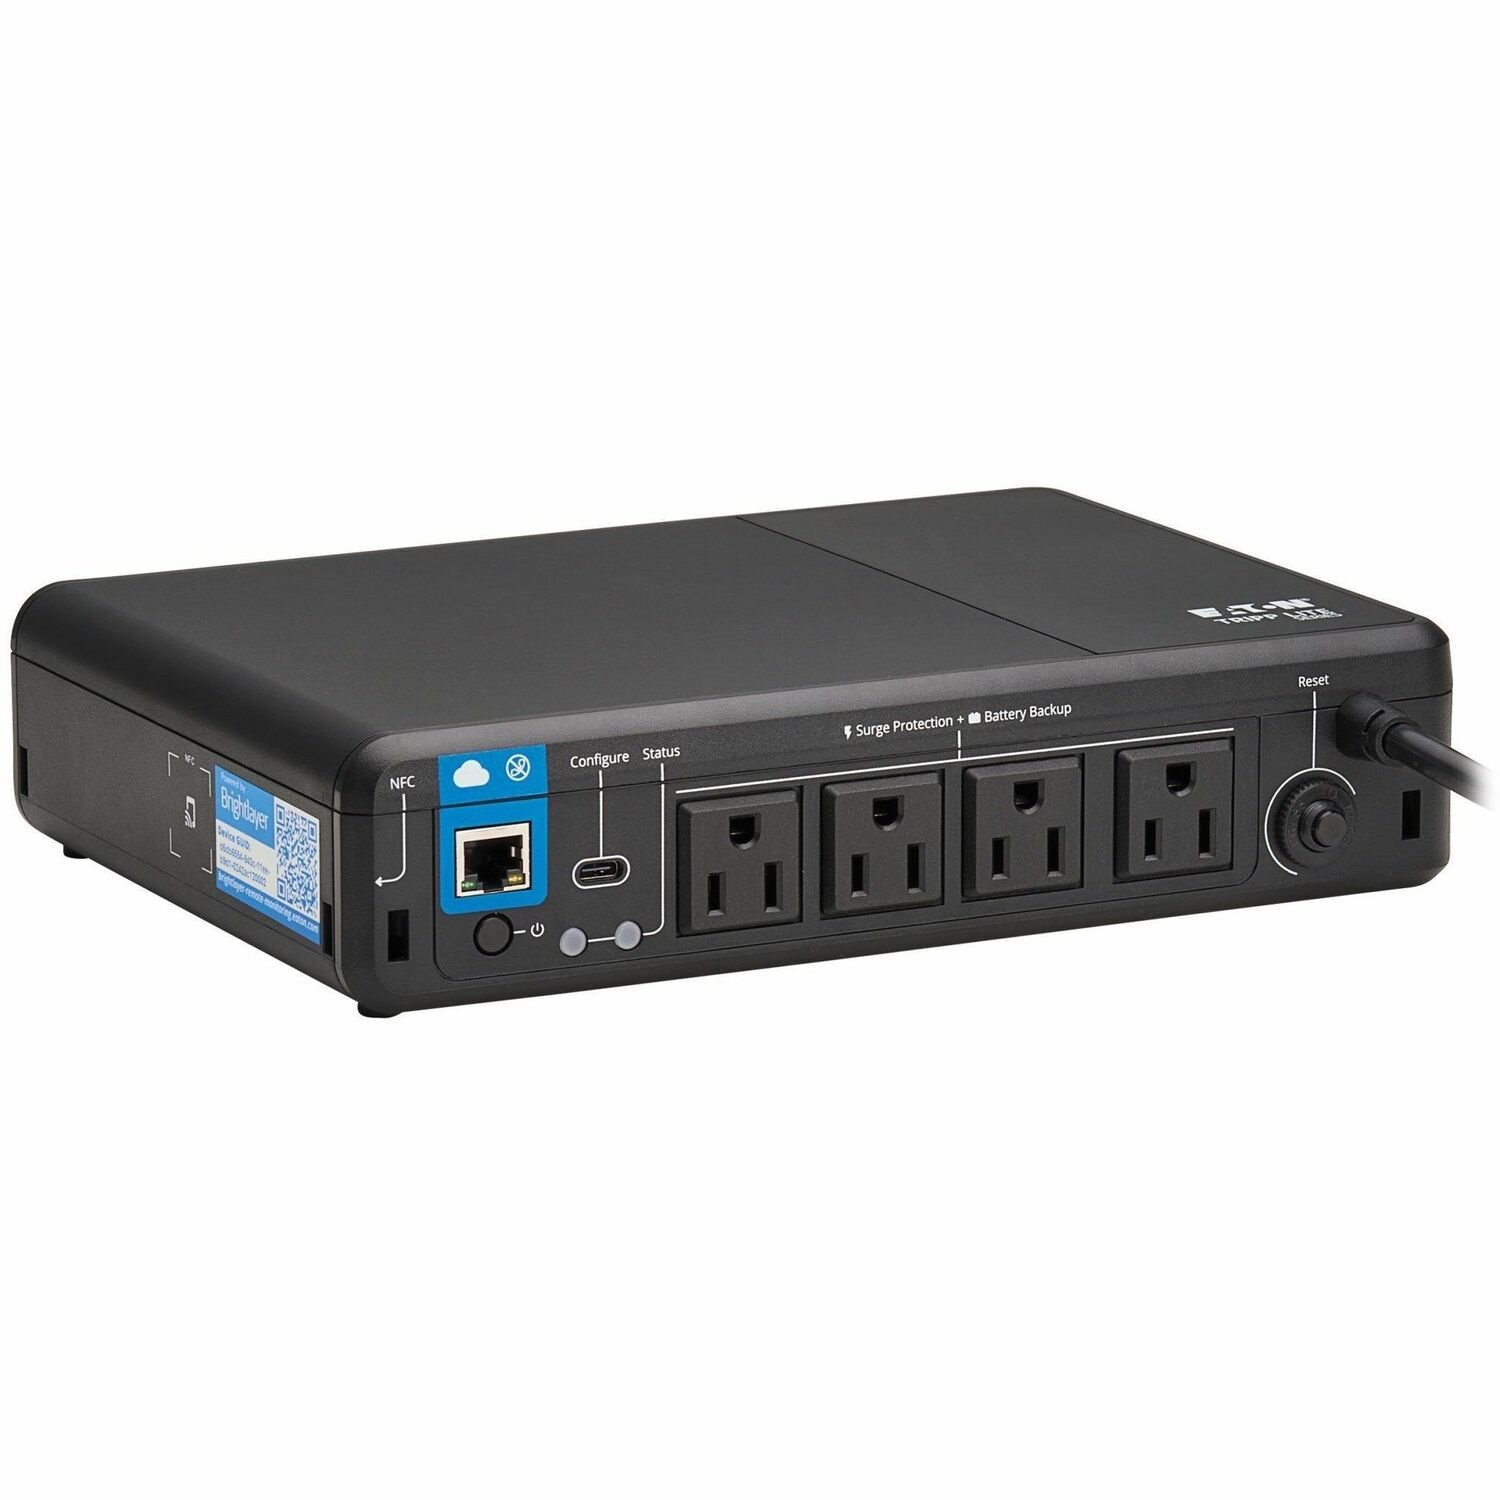 Eaton Tripp Lite Series 600VA 300W 120V Standby Cloud-Connected UPS with Remote Monitoring 4 NEMA 5-15R Battery Backup